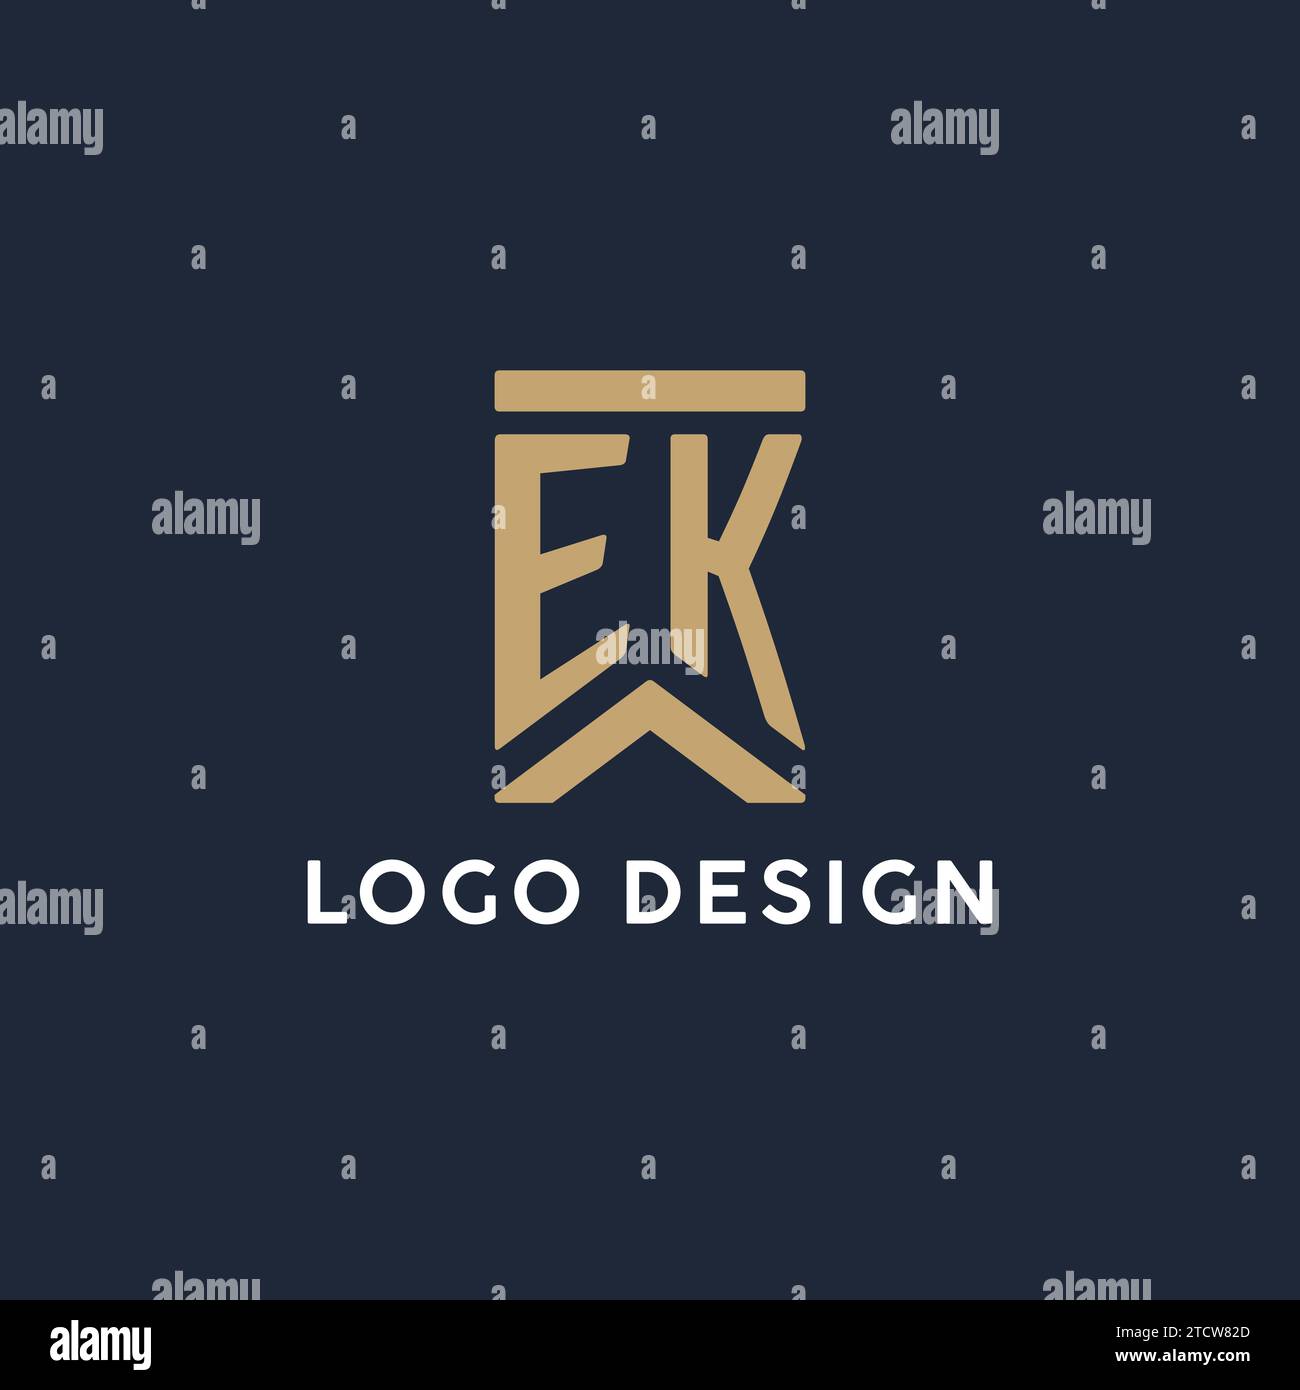 EK initial monogram logo design in a rectangular style with curved side ideas Stock Vector